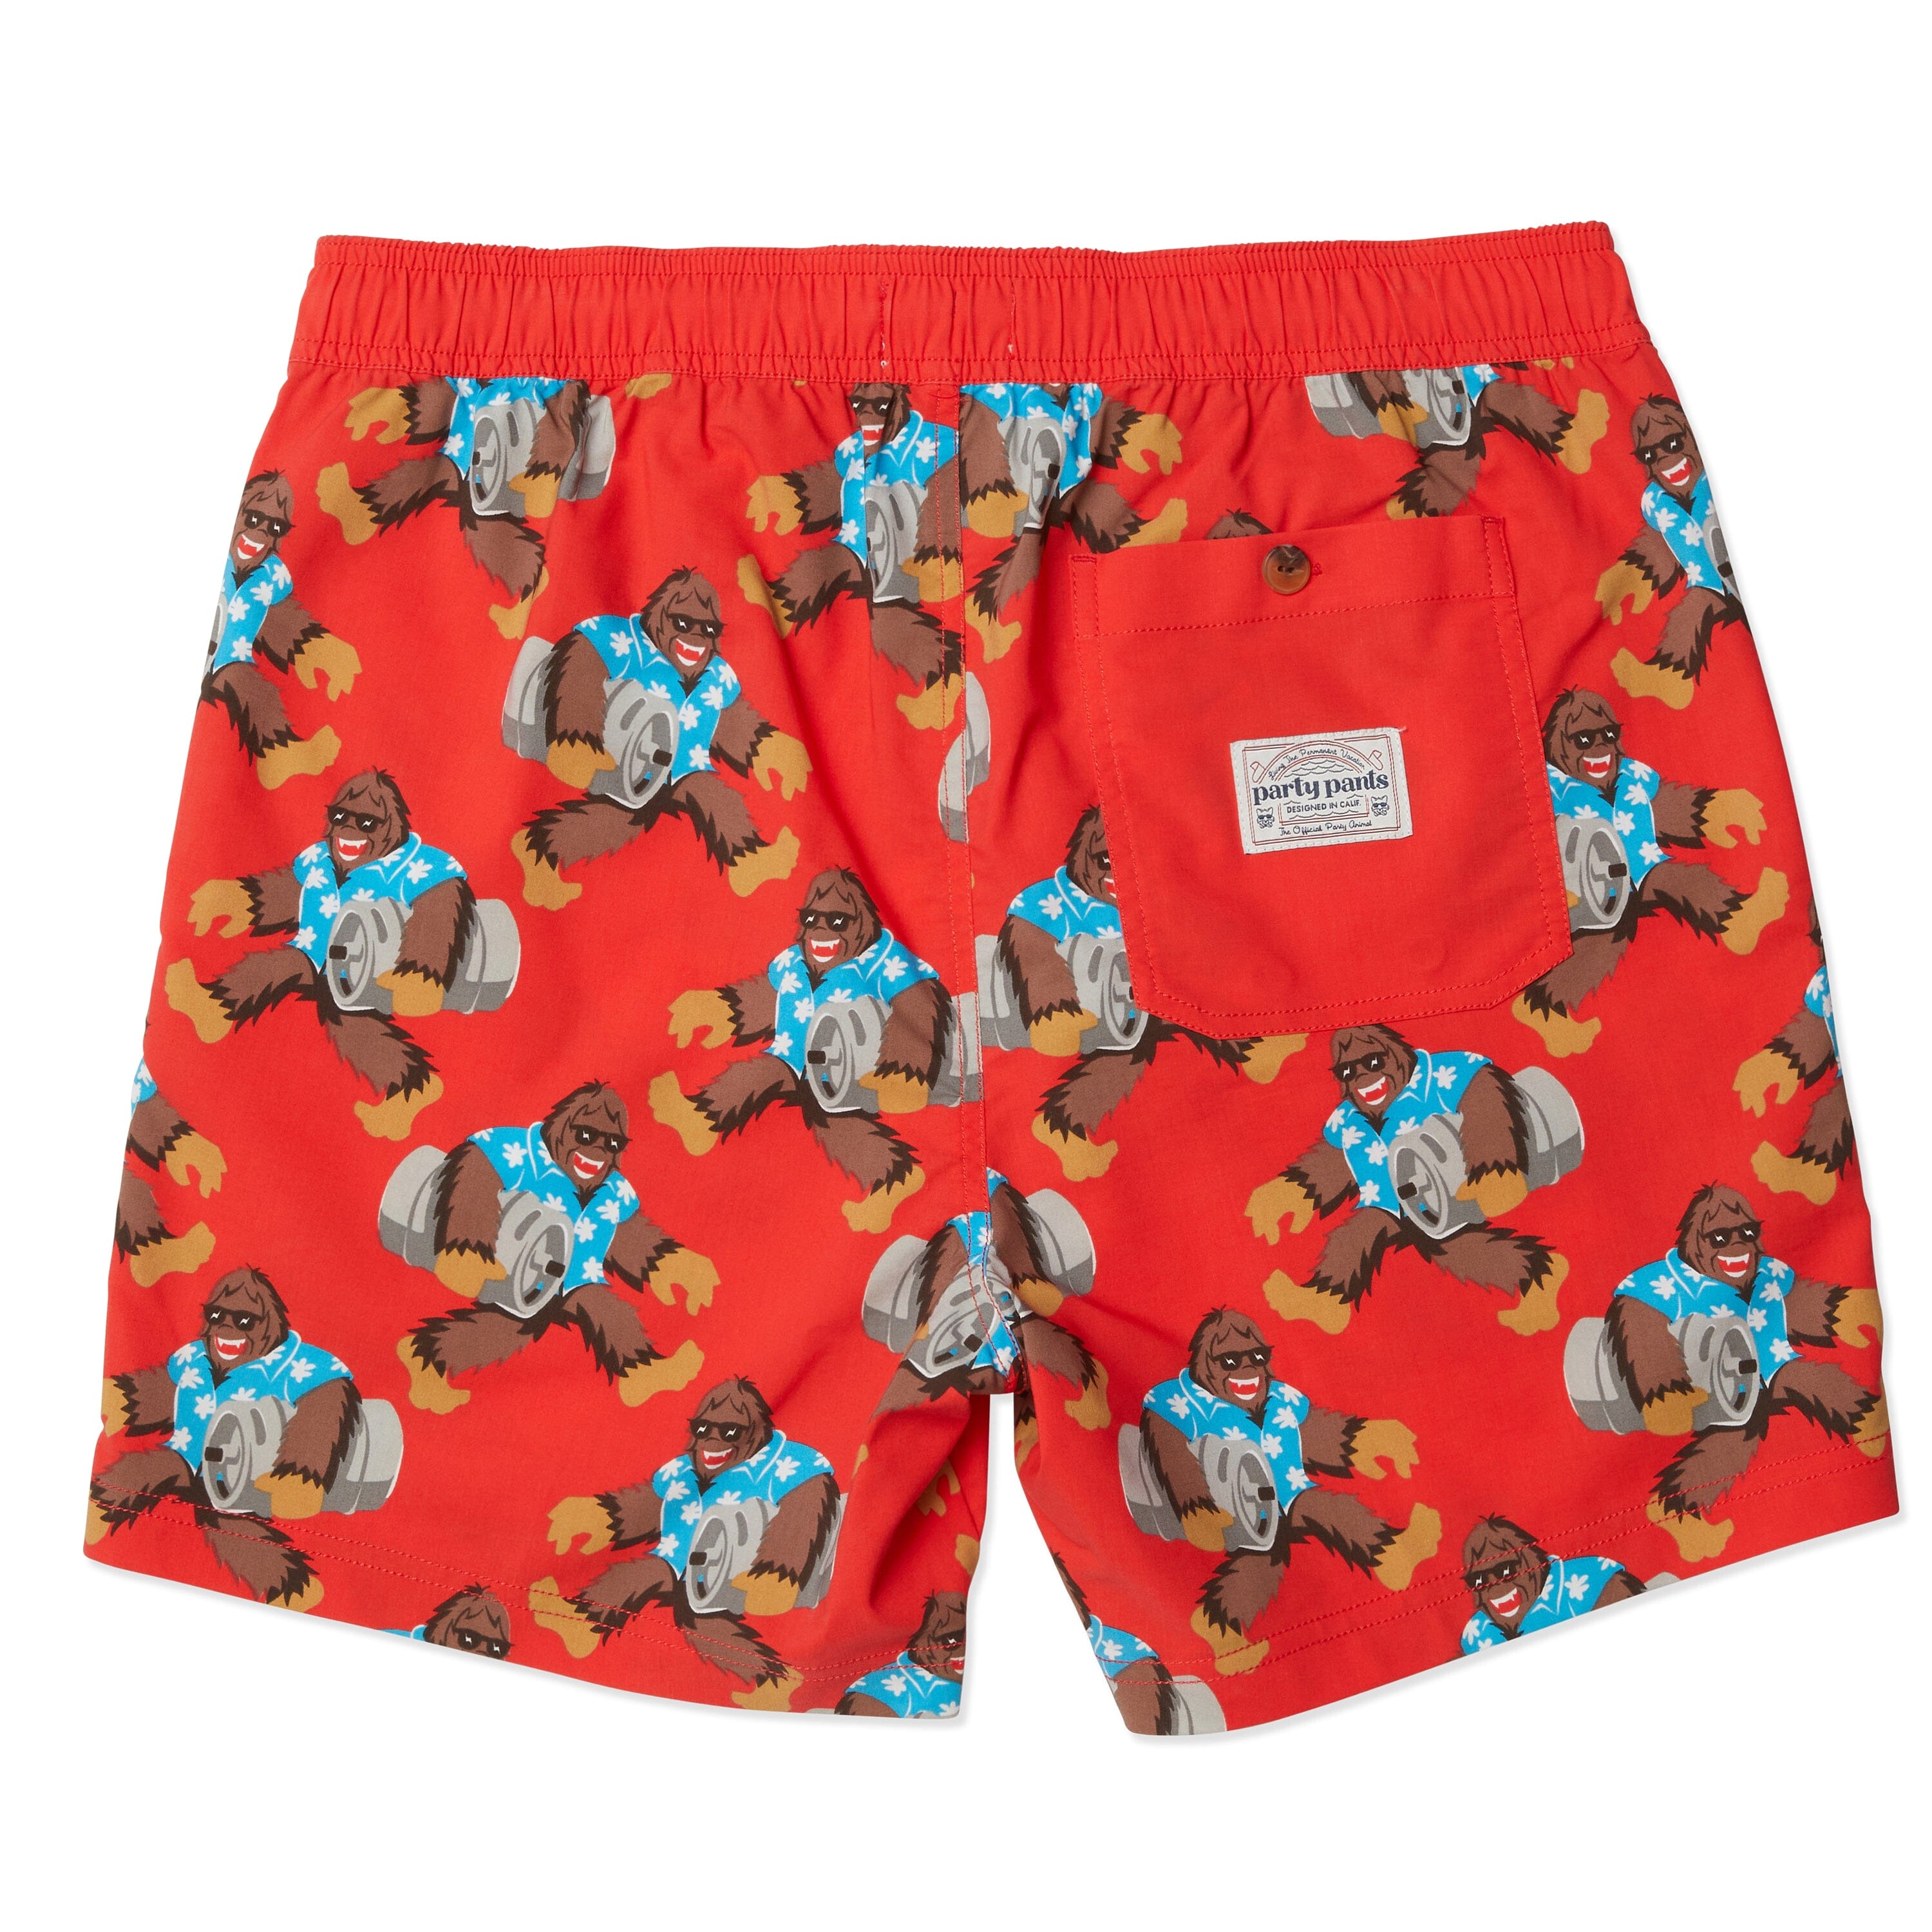 YETI PARTY STARTER SHORT - RED PRINTED SHORTS PARTY PANTS 